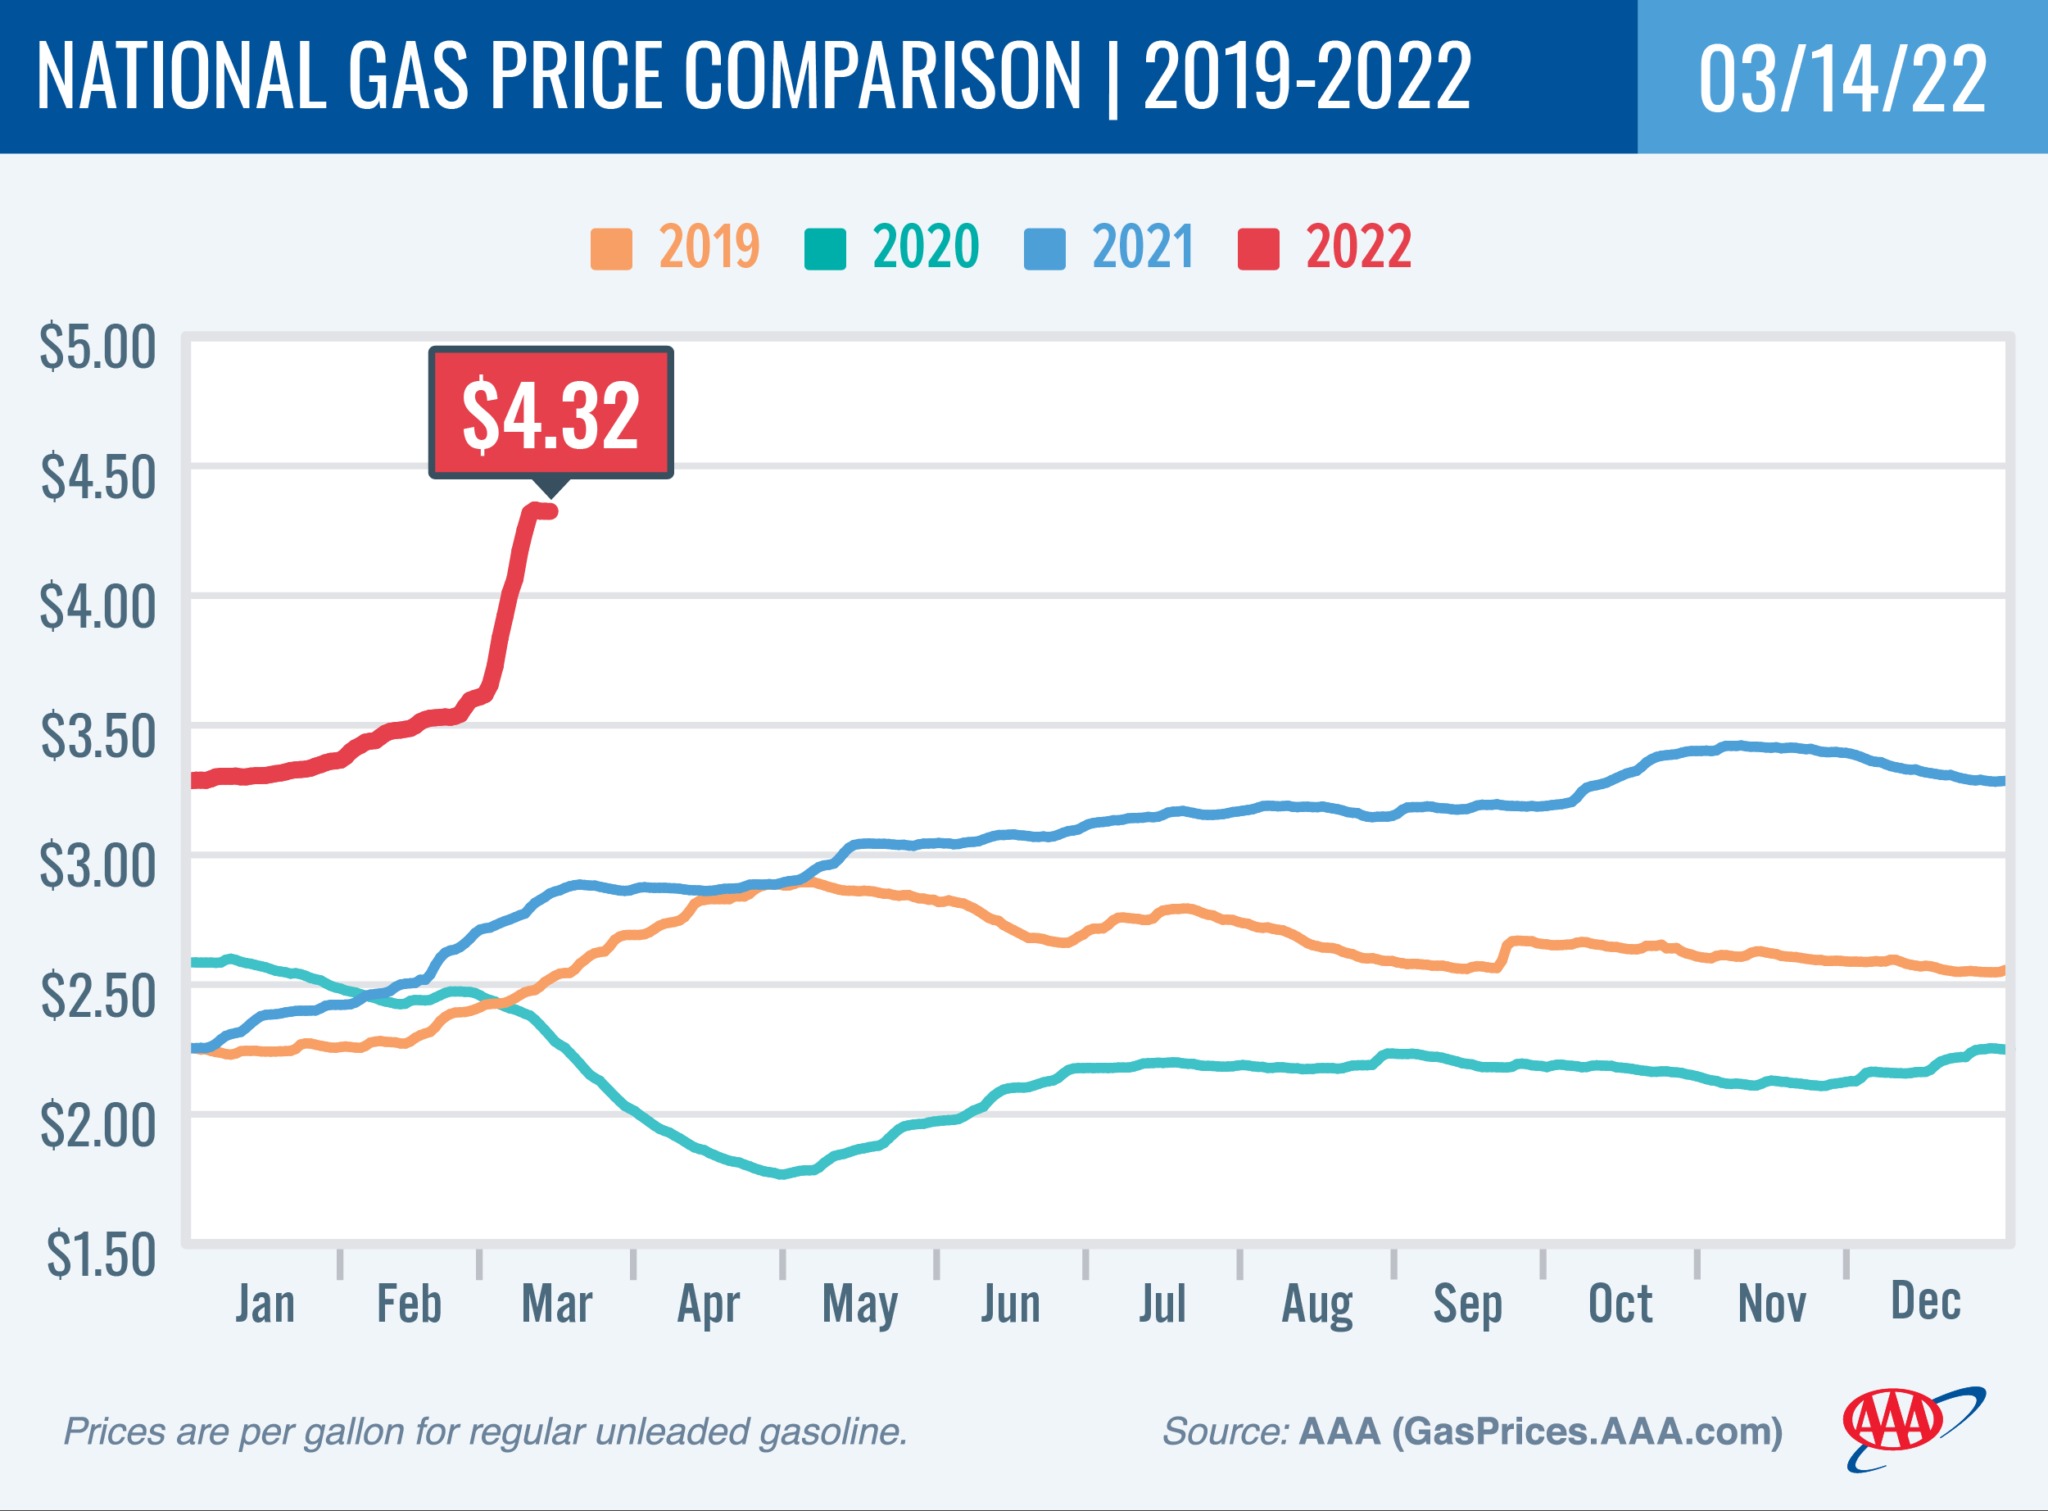 national gas price comparison chart 2019 to 2022